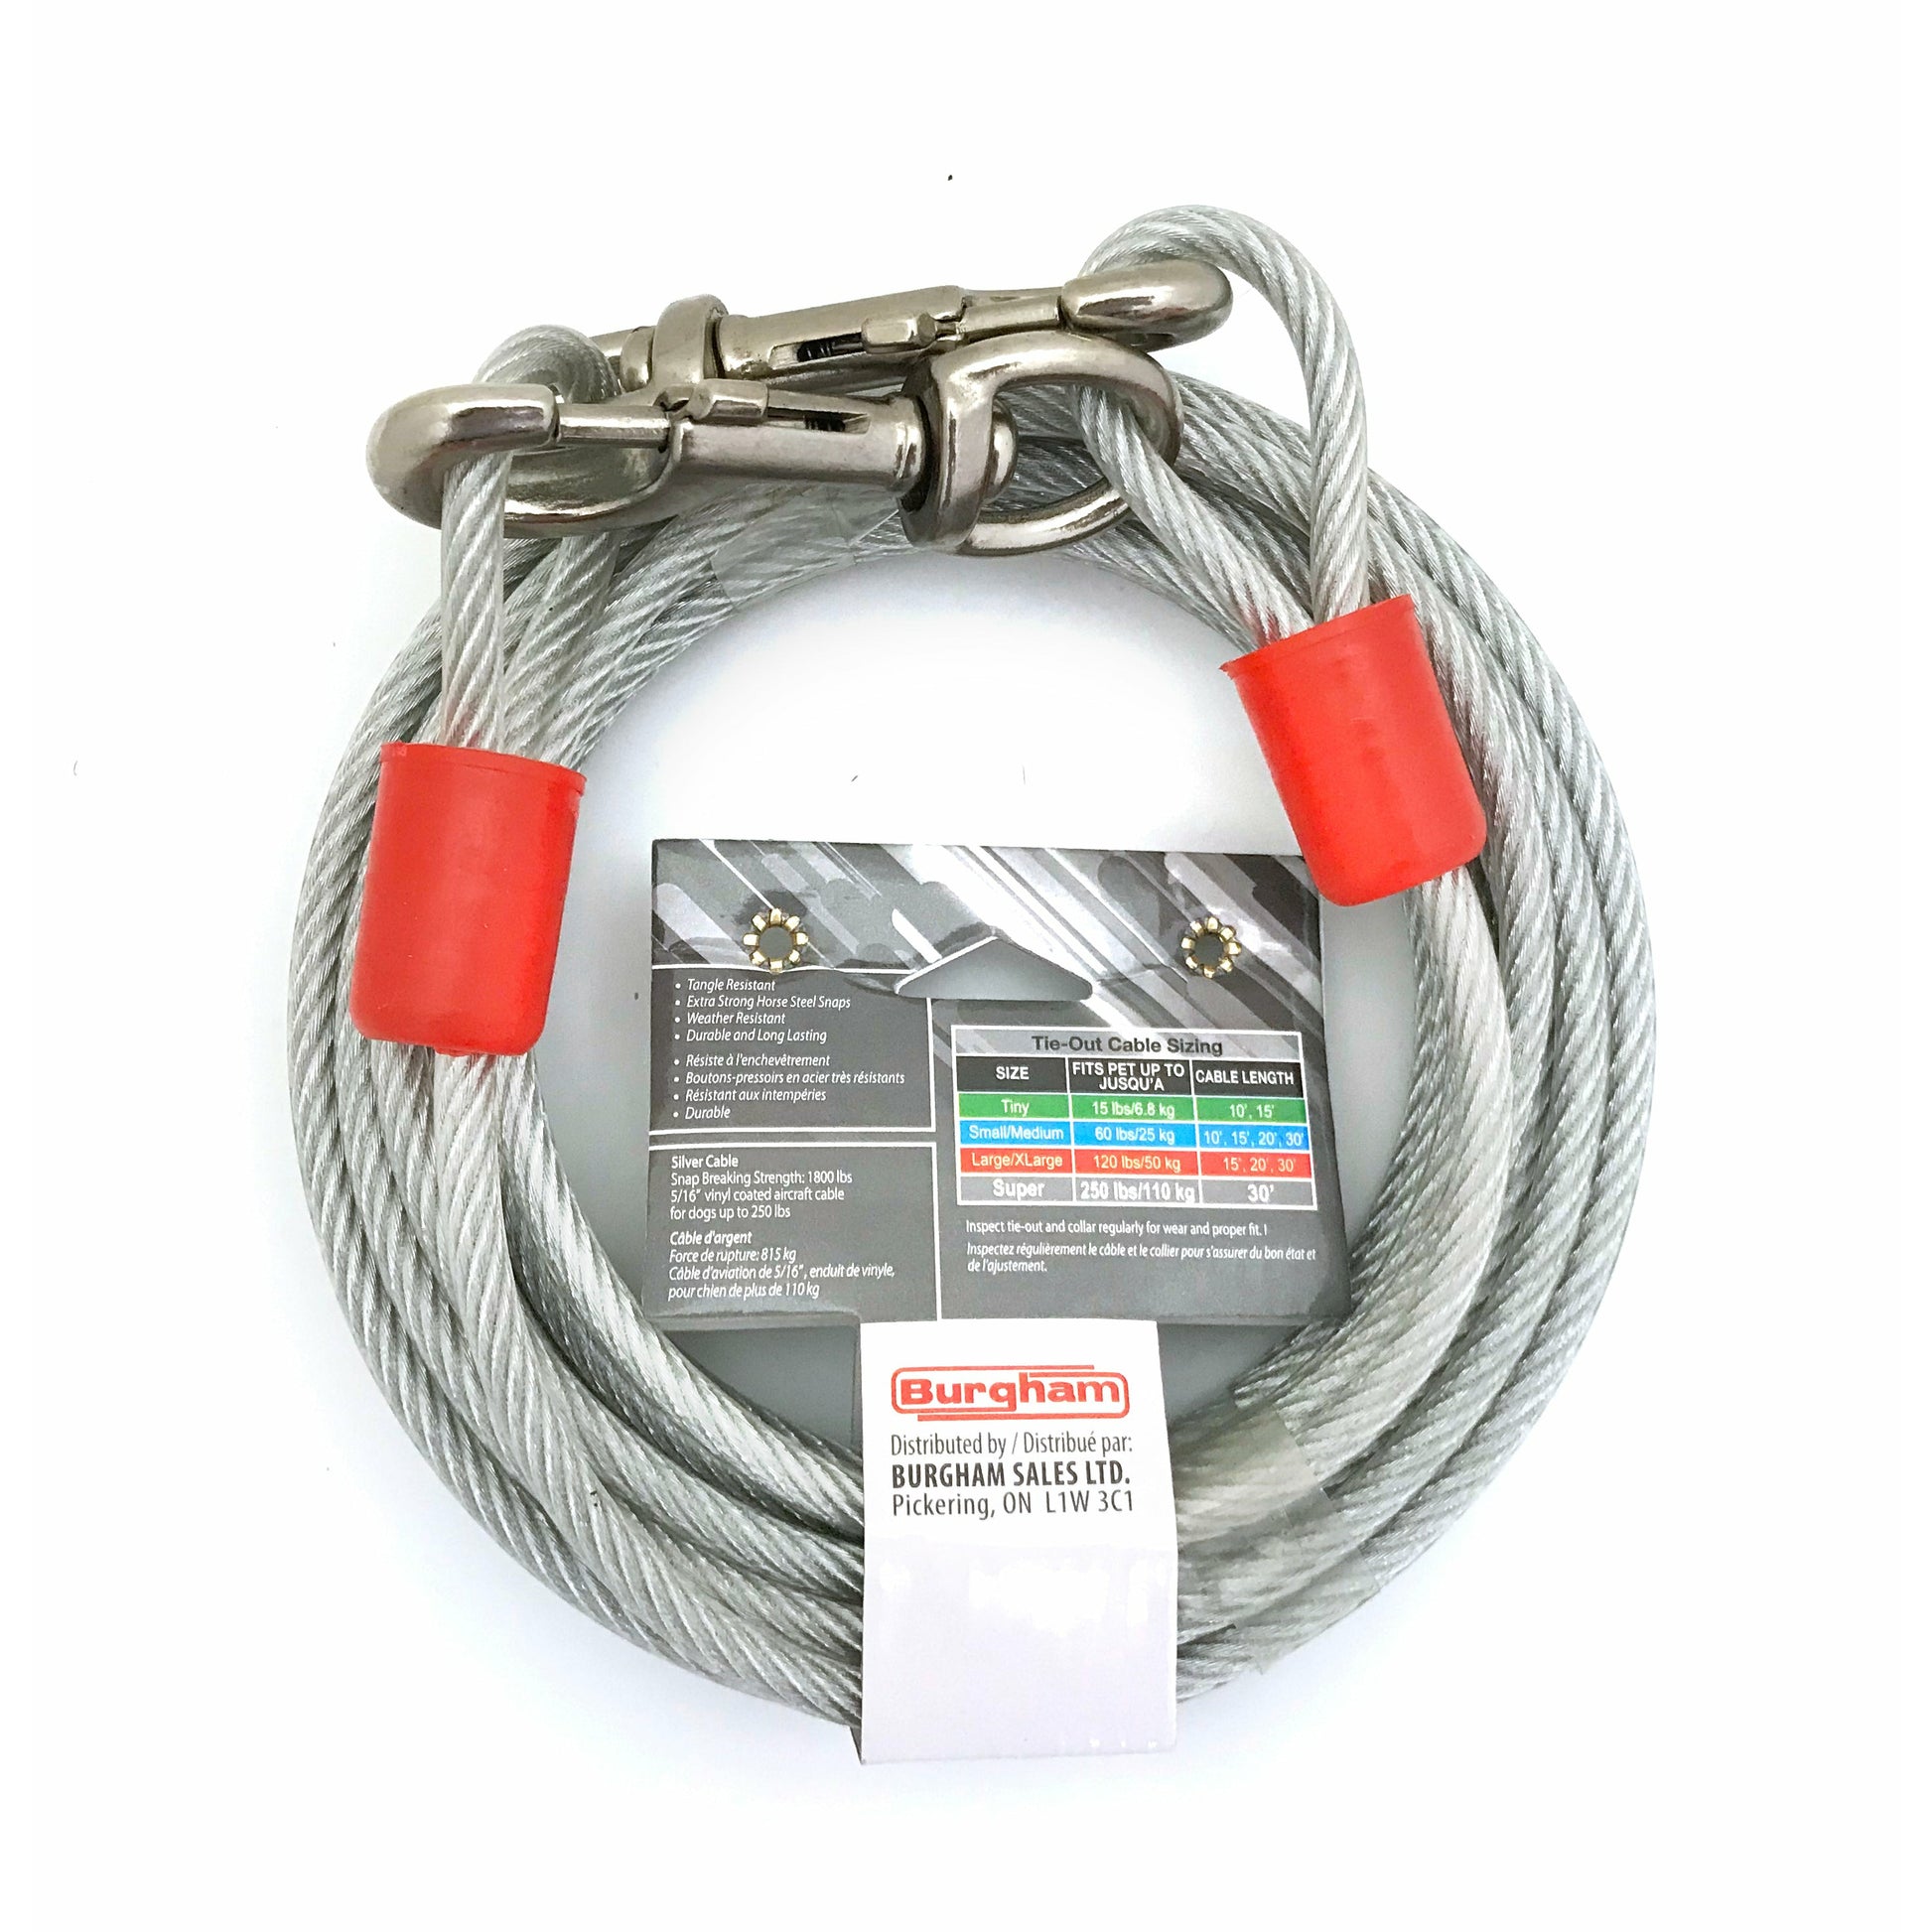 Tuff Tie Out Cable Extra Heavy  Tie Outs  | PetMax Canada